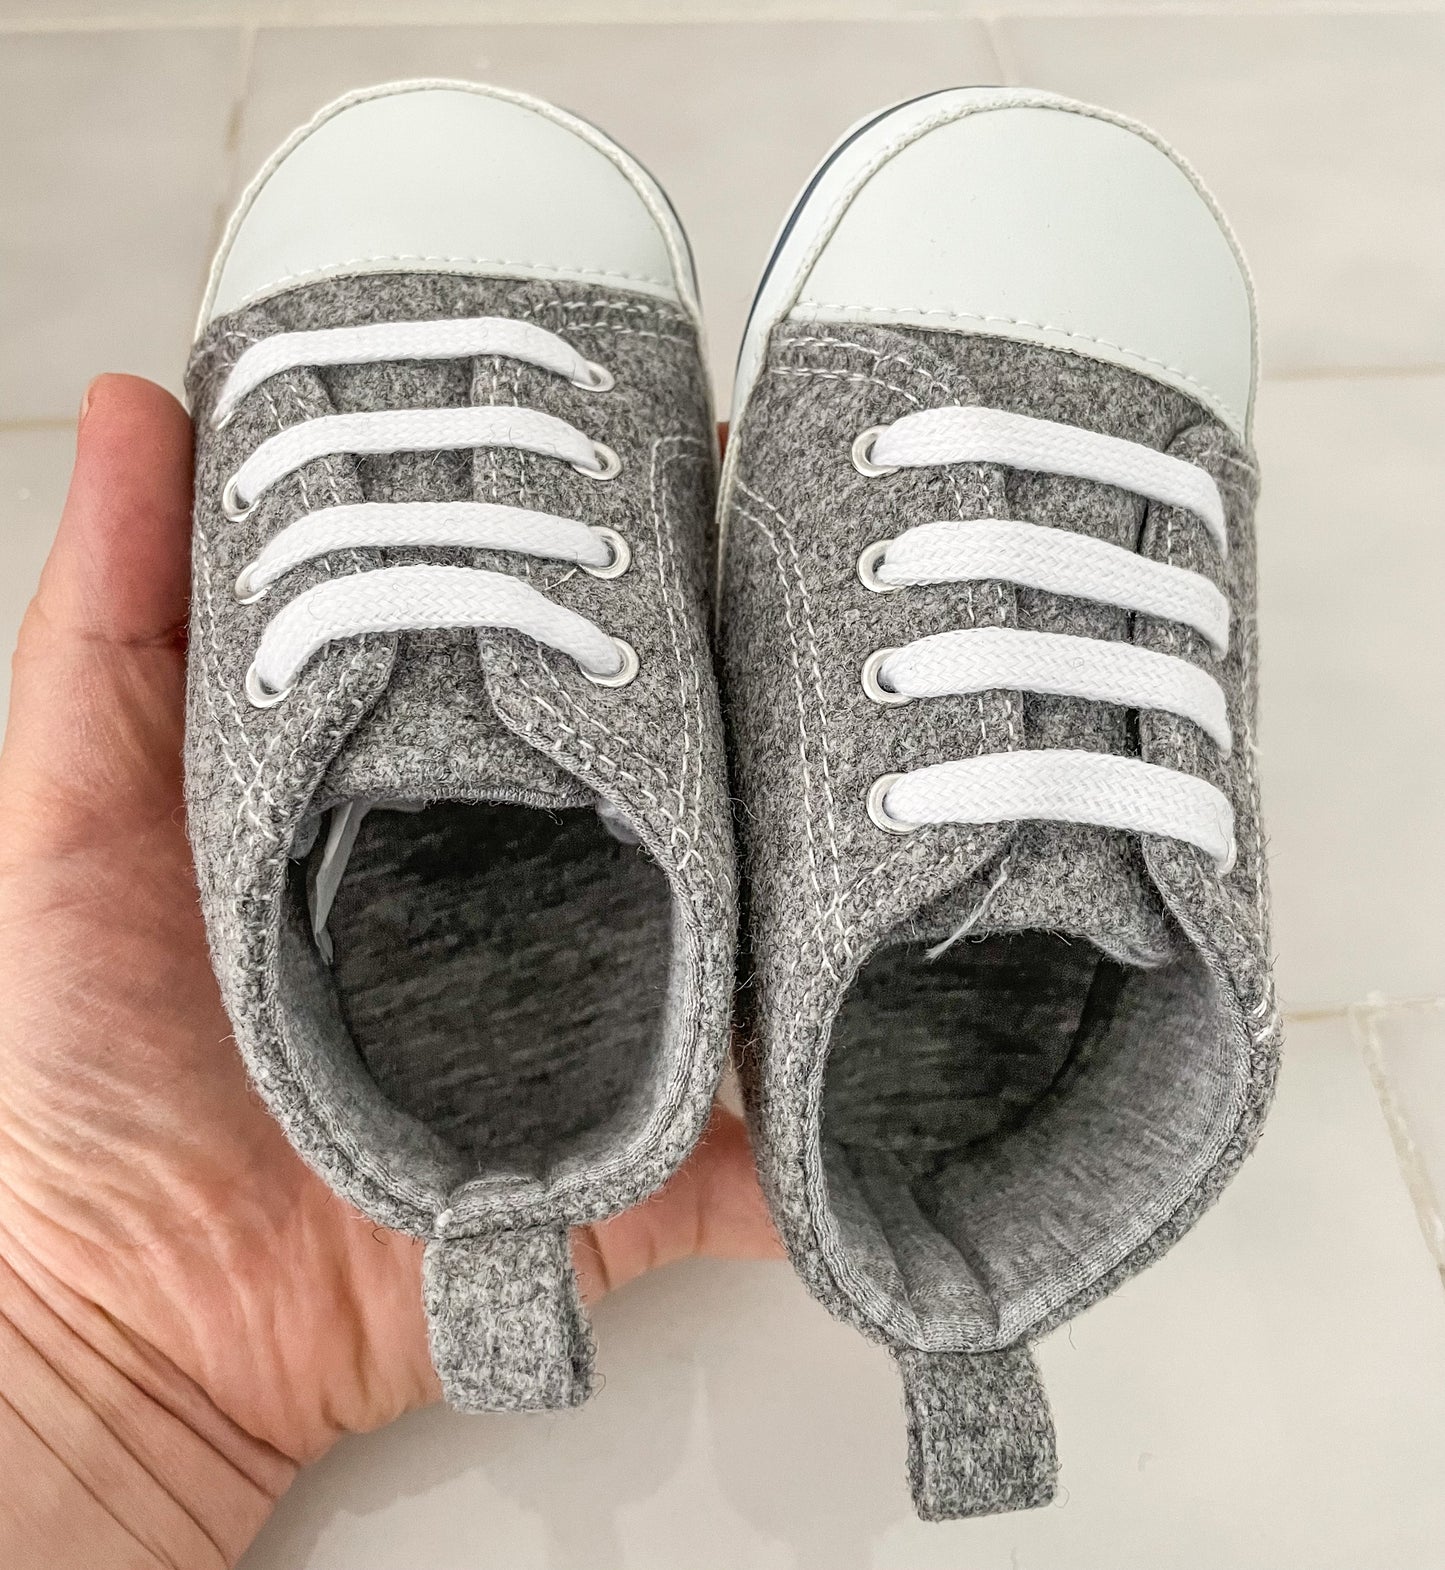 Buy High quality Laced-up Baby Sneakers / Canvas lace up sport baby sneaker - Baby and Sunshine